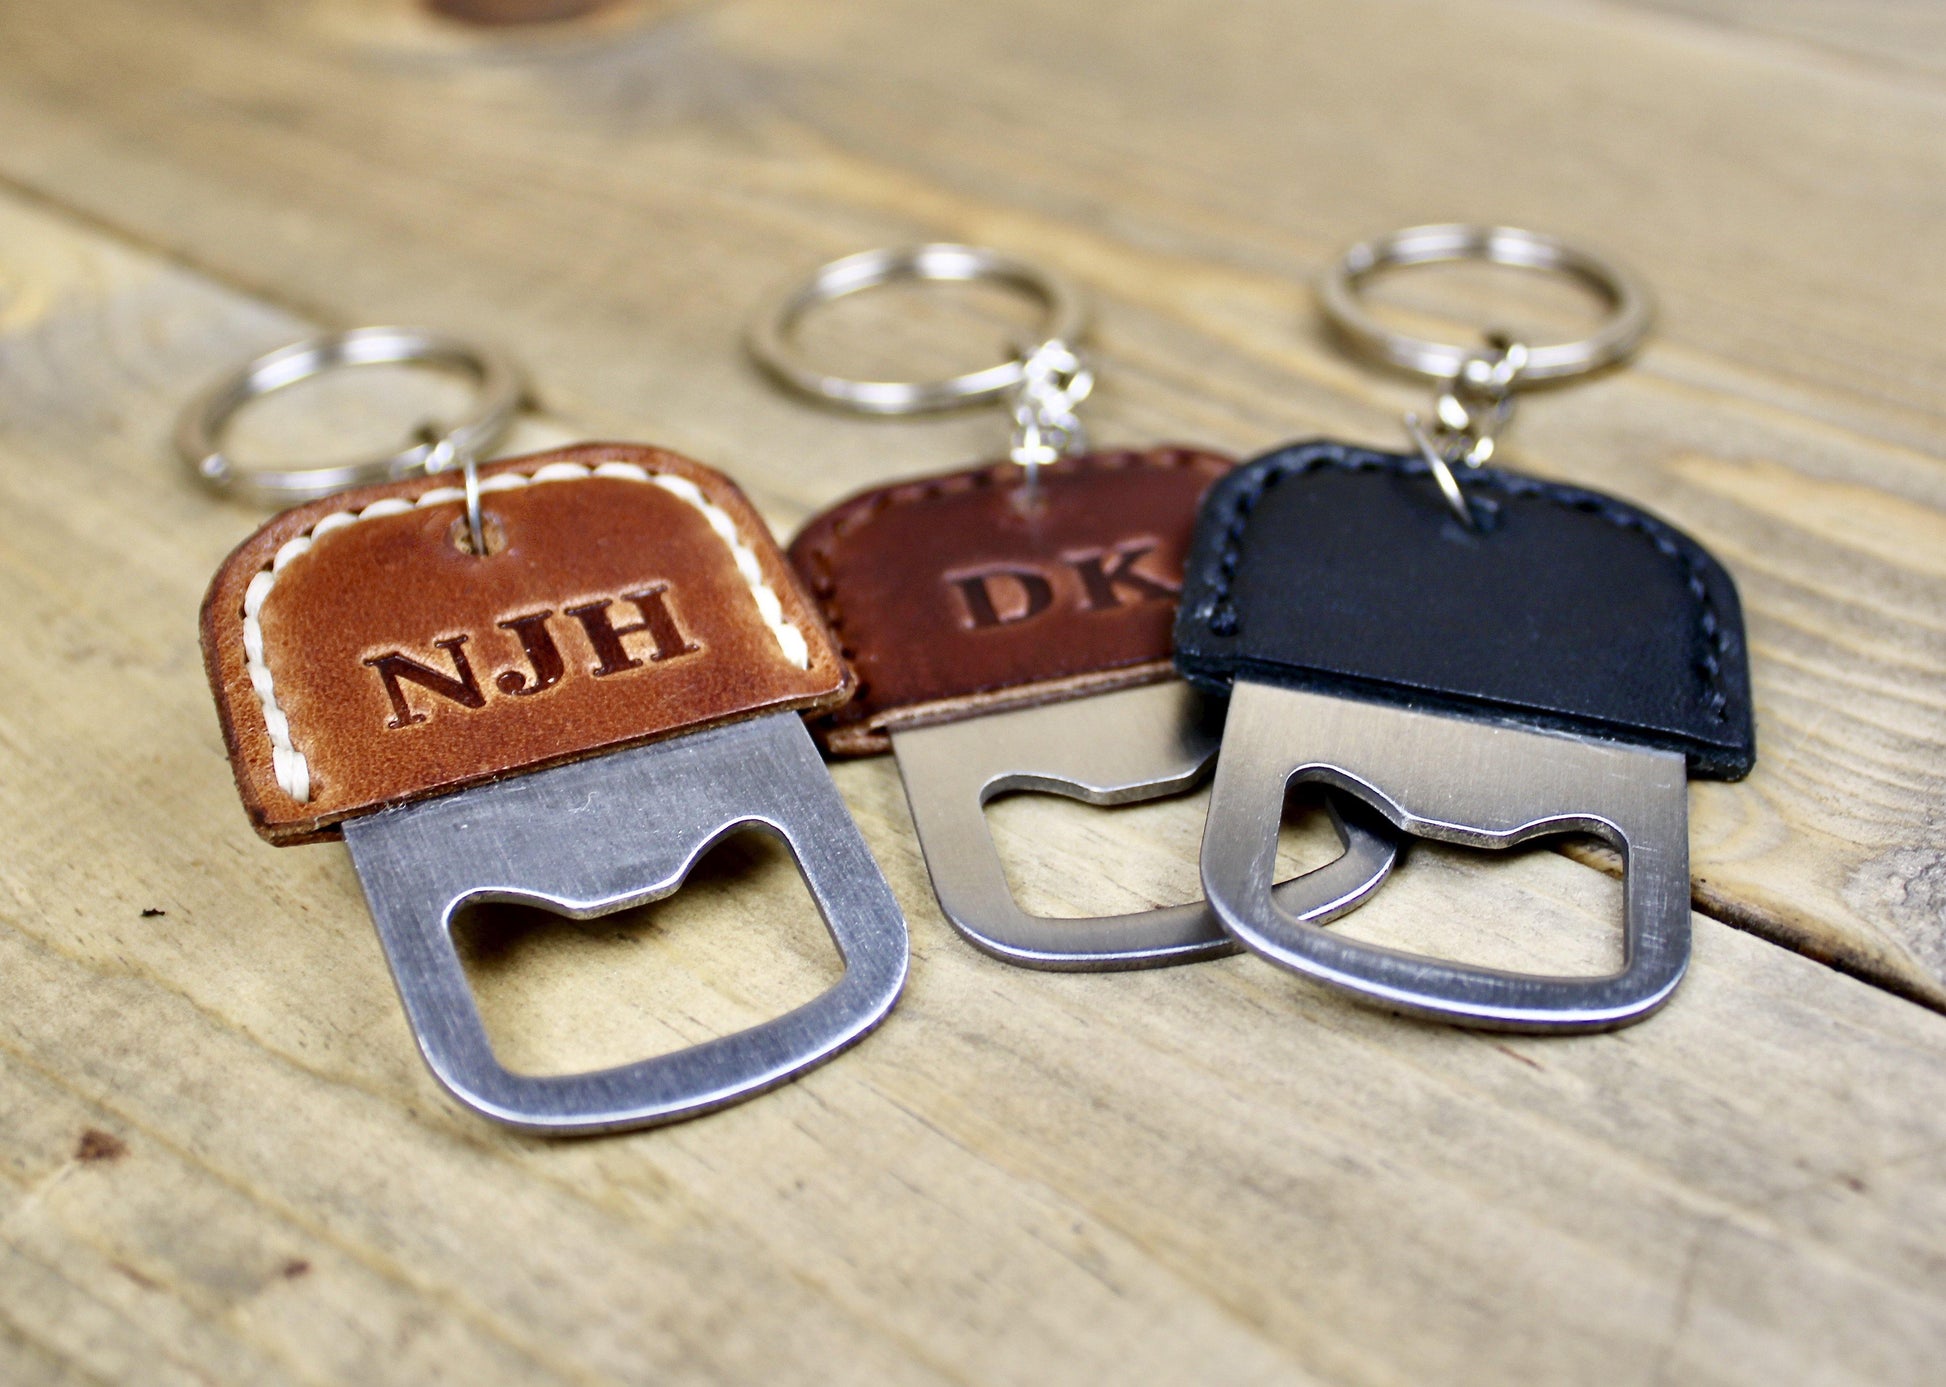 Leather Bottle Opener Keychains made with Buck Brown, Medium Brown or Black Wickett and Craig Leather